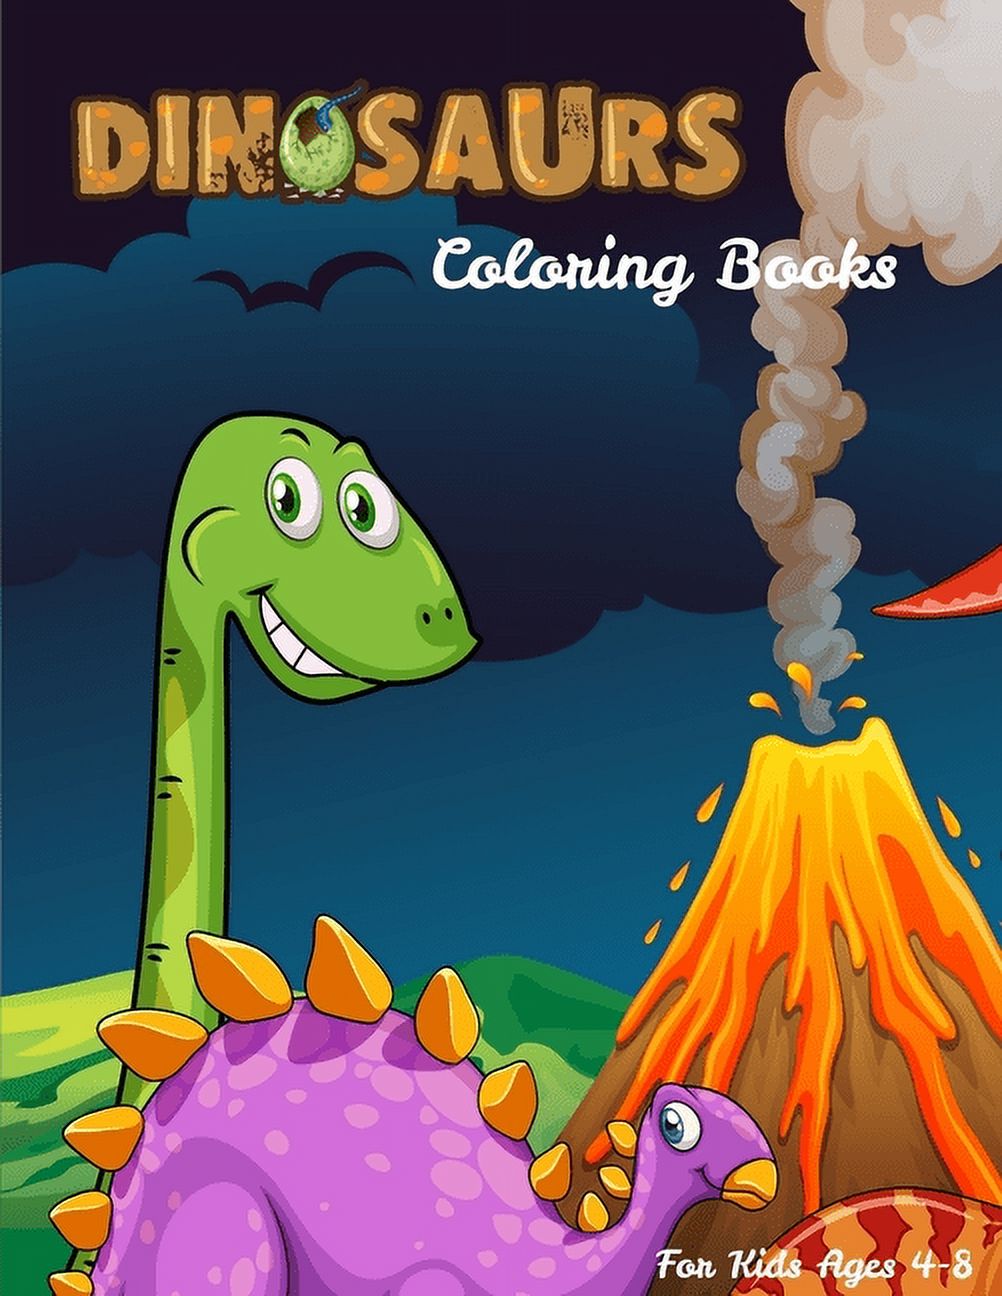 Coloring Books for Kids Ages 4-8 Animals: Dinosaurs Coloring Books